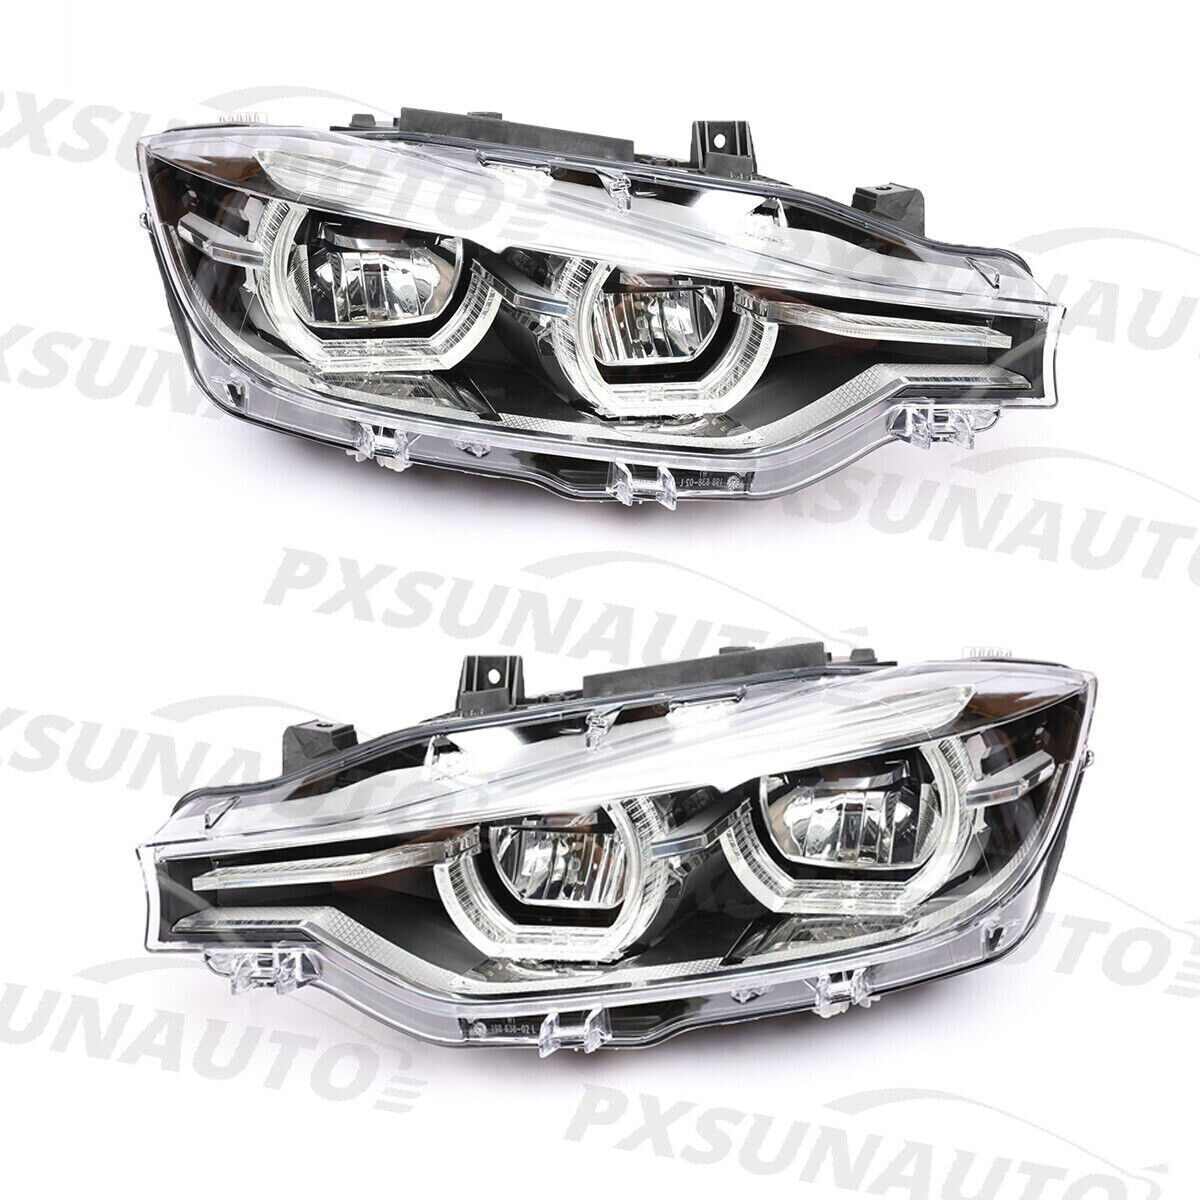 PENSUN LED DRL For 2013 14 15 BMW F30 3-Series Projector Headlights Replace Halo